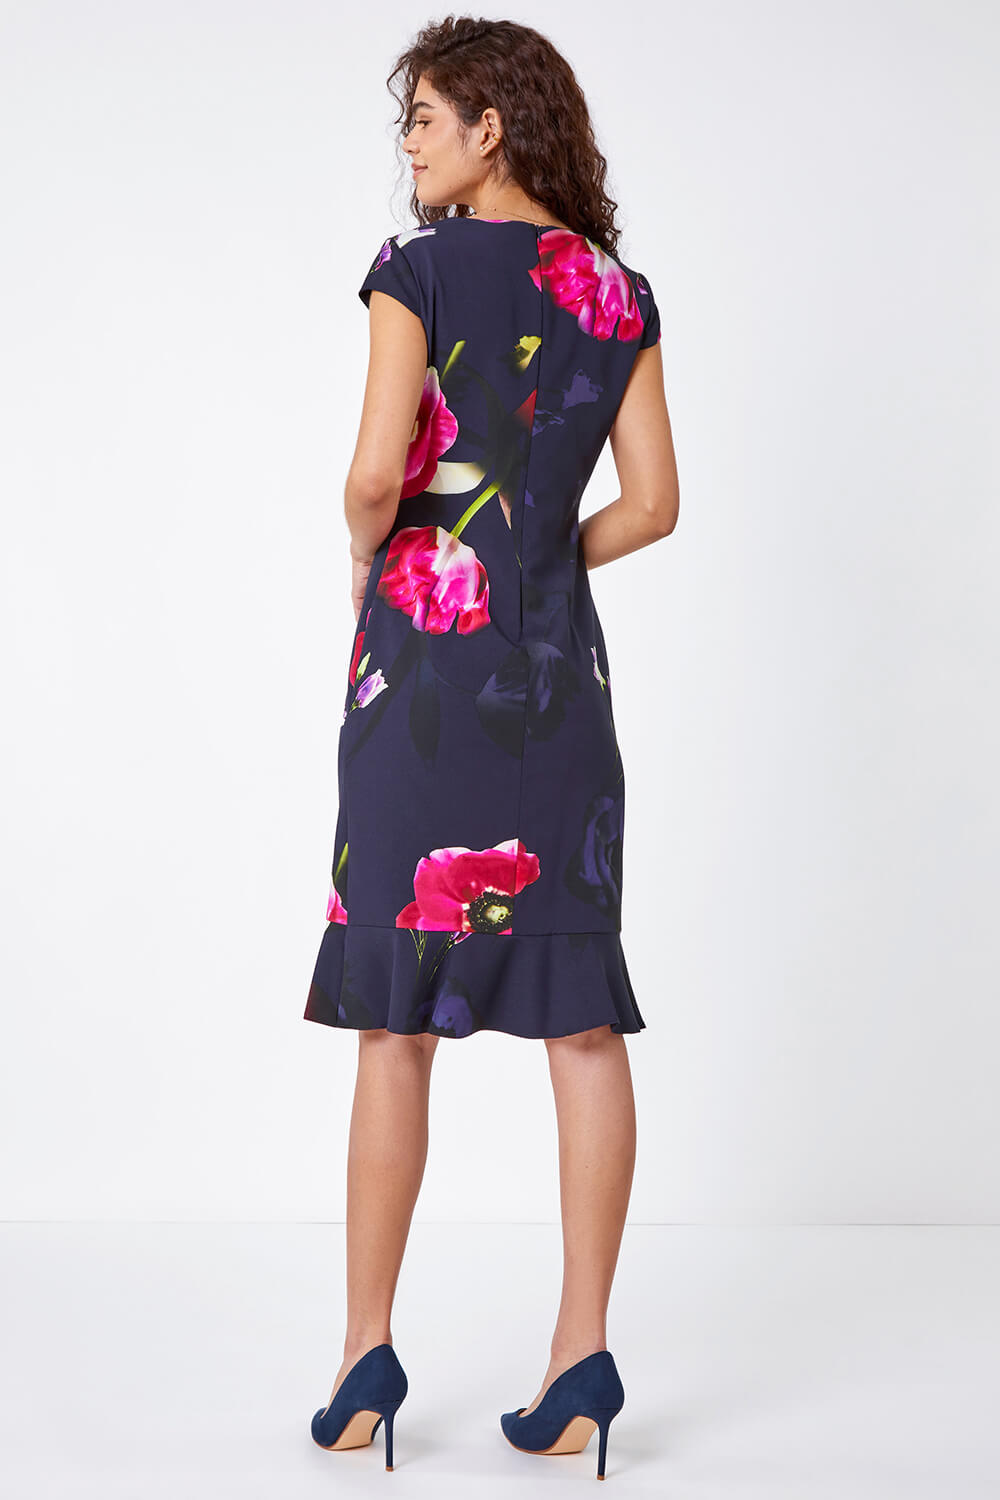 Navy  Floral Frill Premium Stretch Ruched Dress, Image 3 of 5